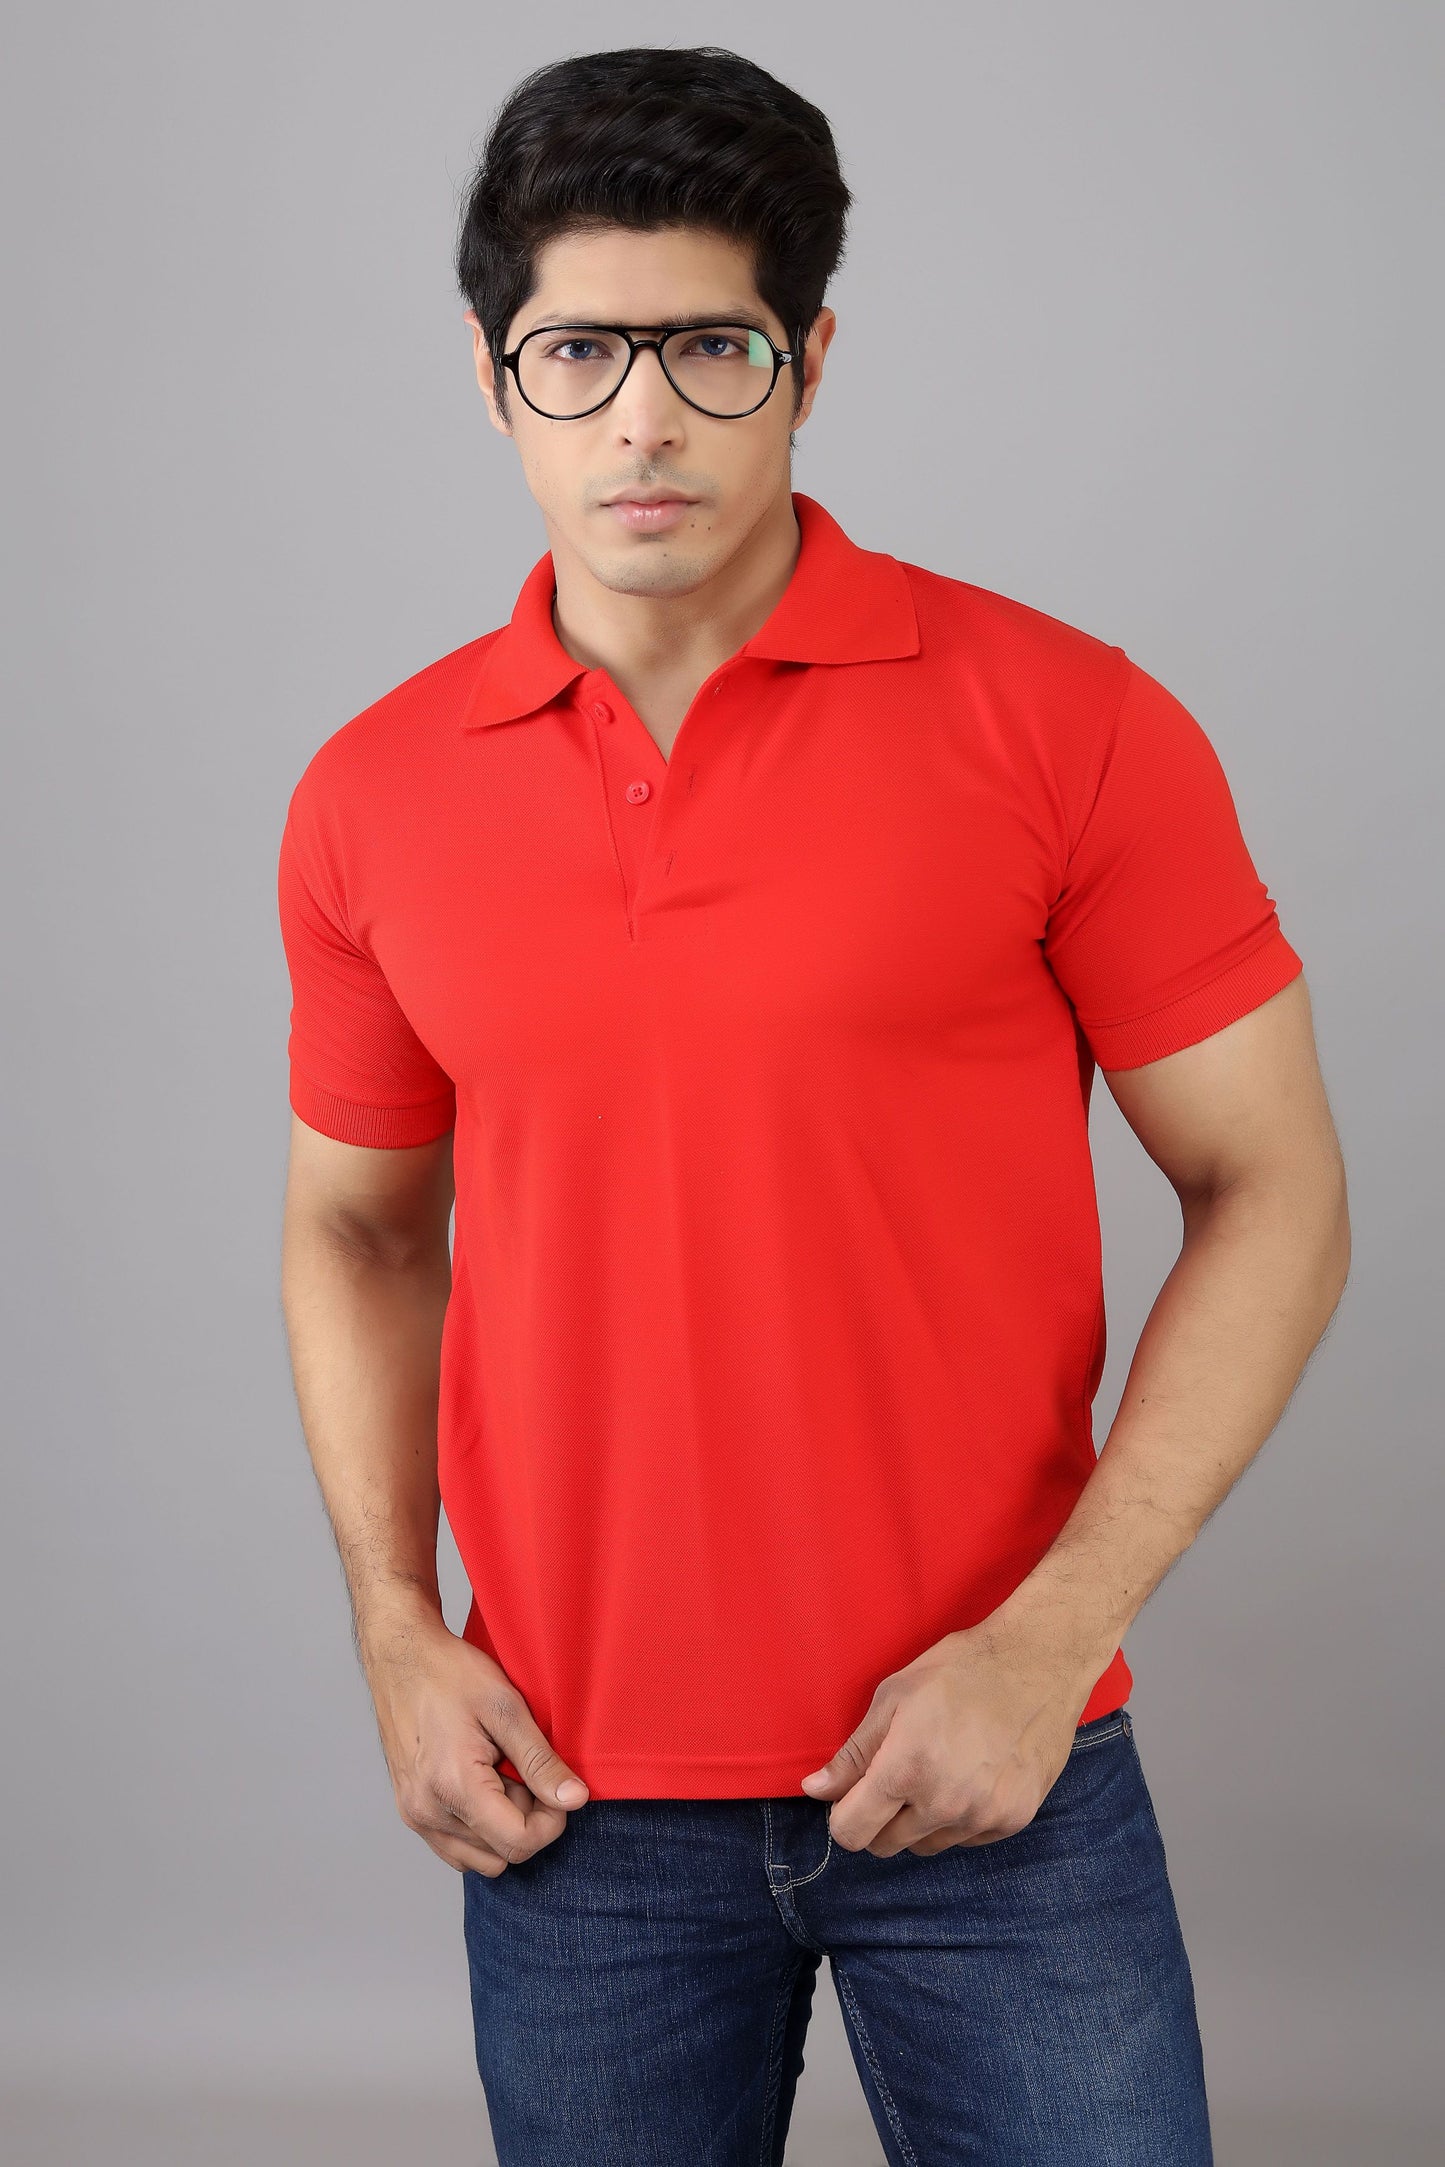 Polo T Shirts for Men